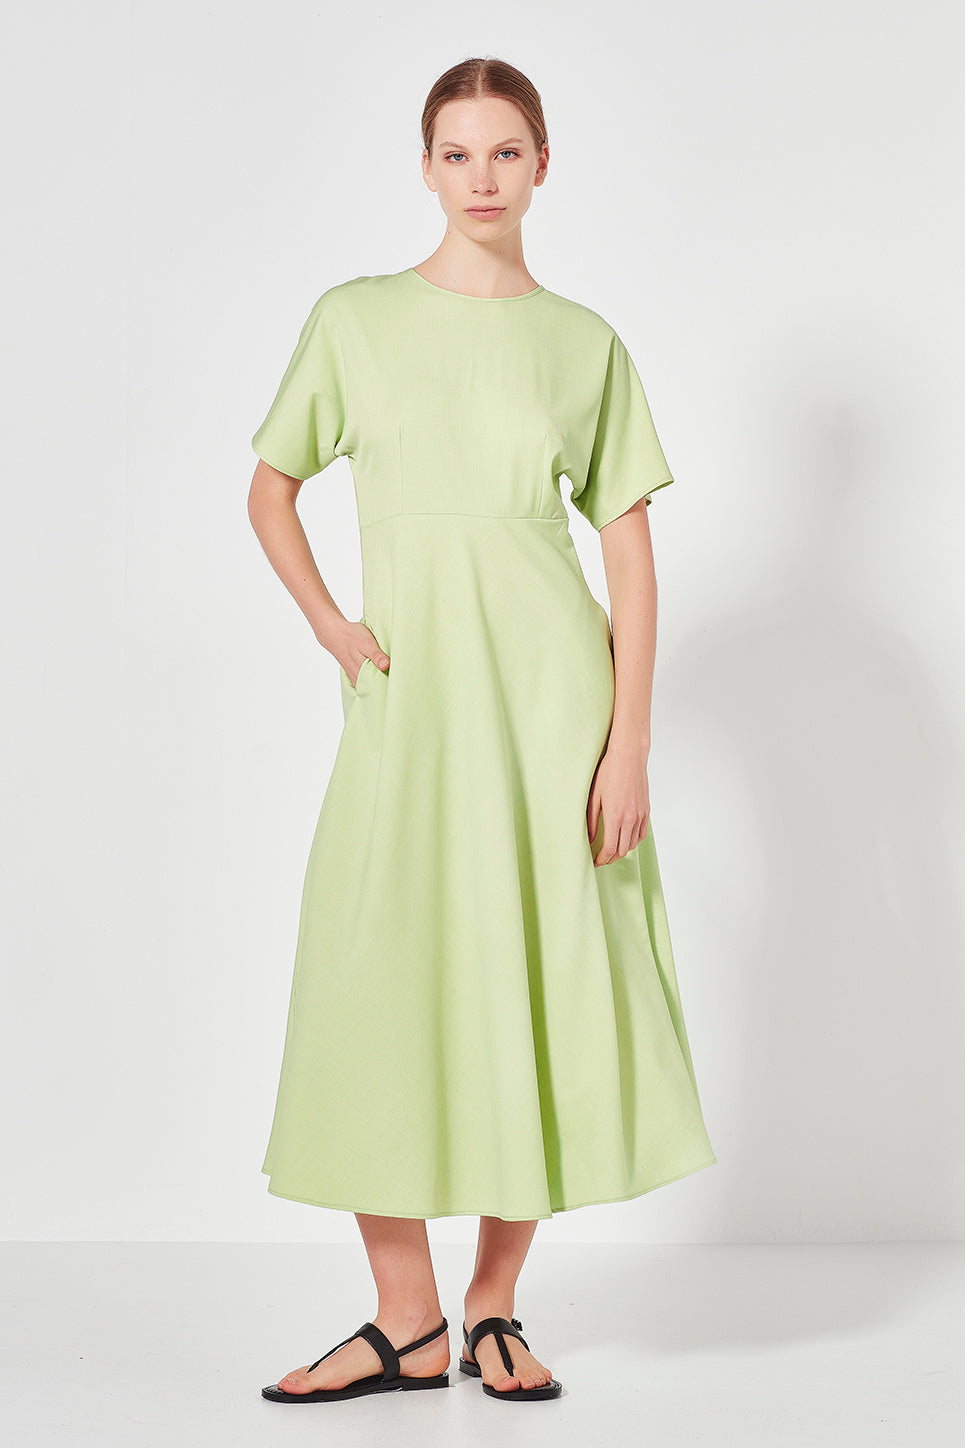 The Evelyn 2-Way Dress in Apple